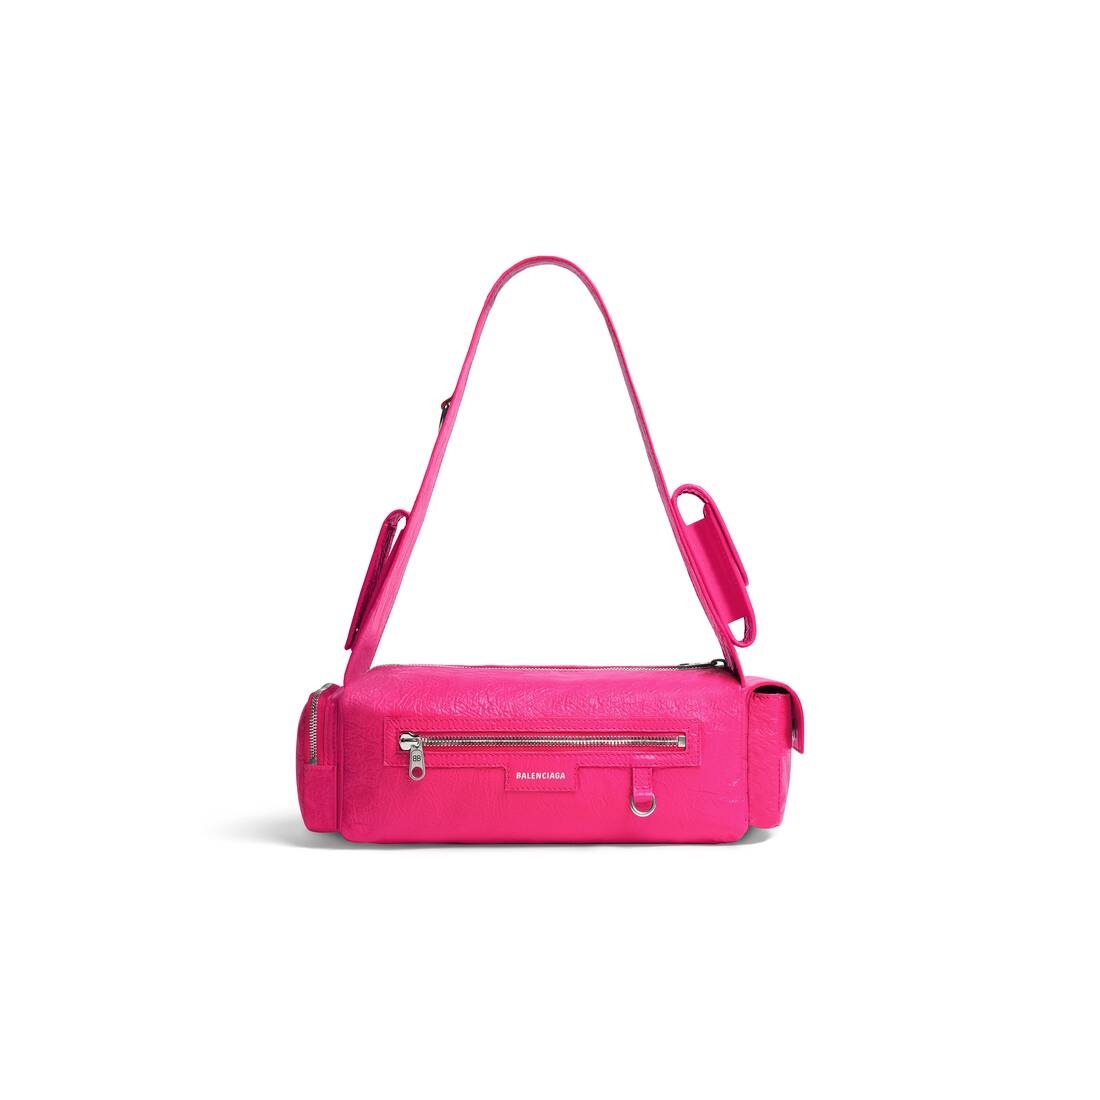 Superbusy Xs Sling Bag  in Bright Pink - 5